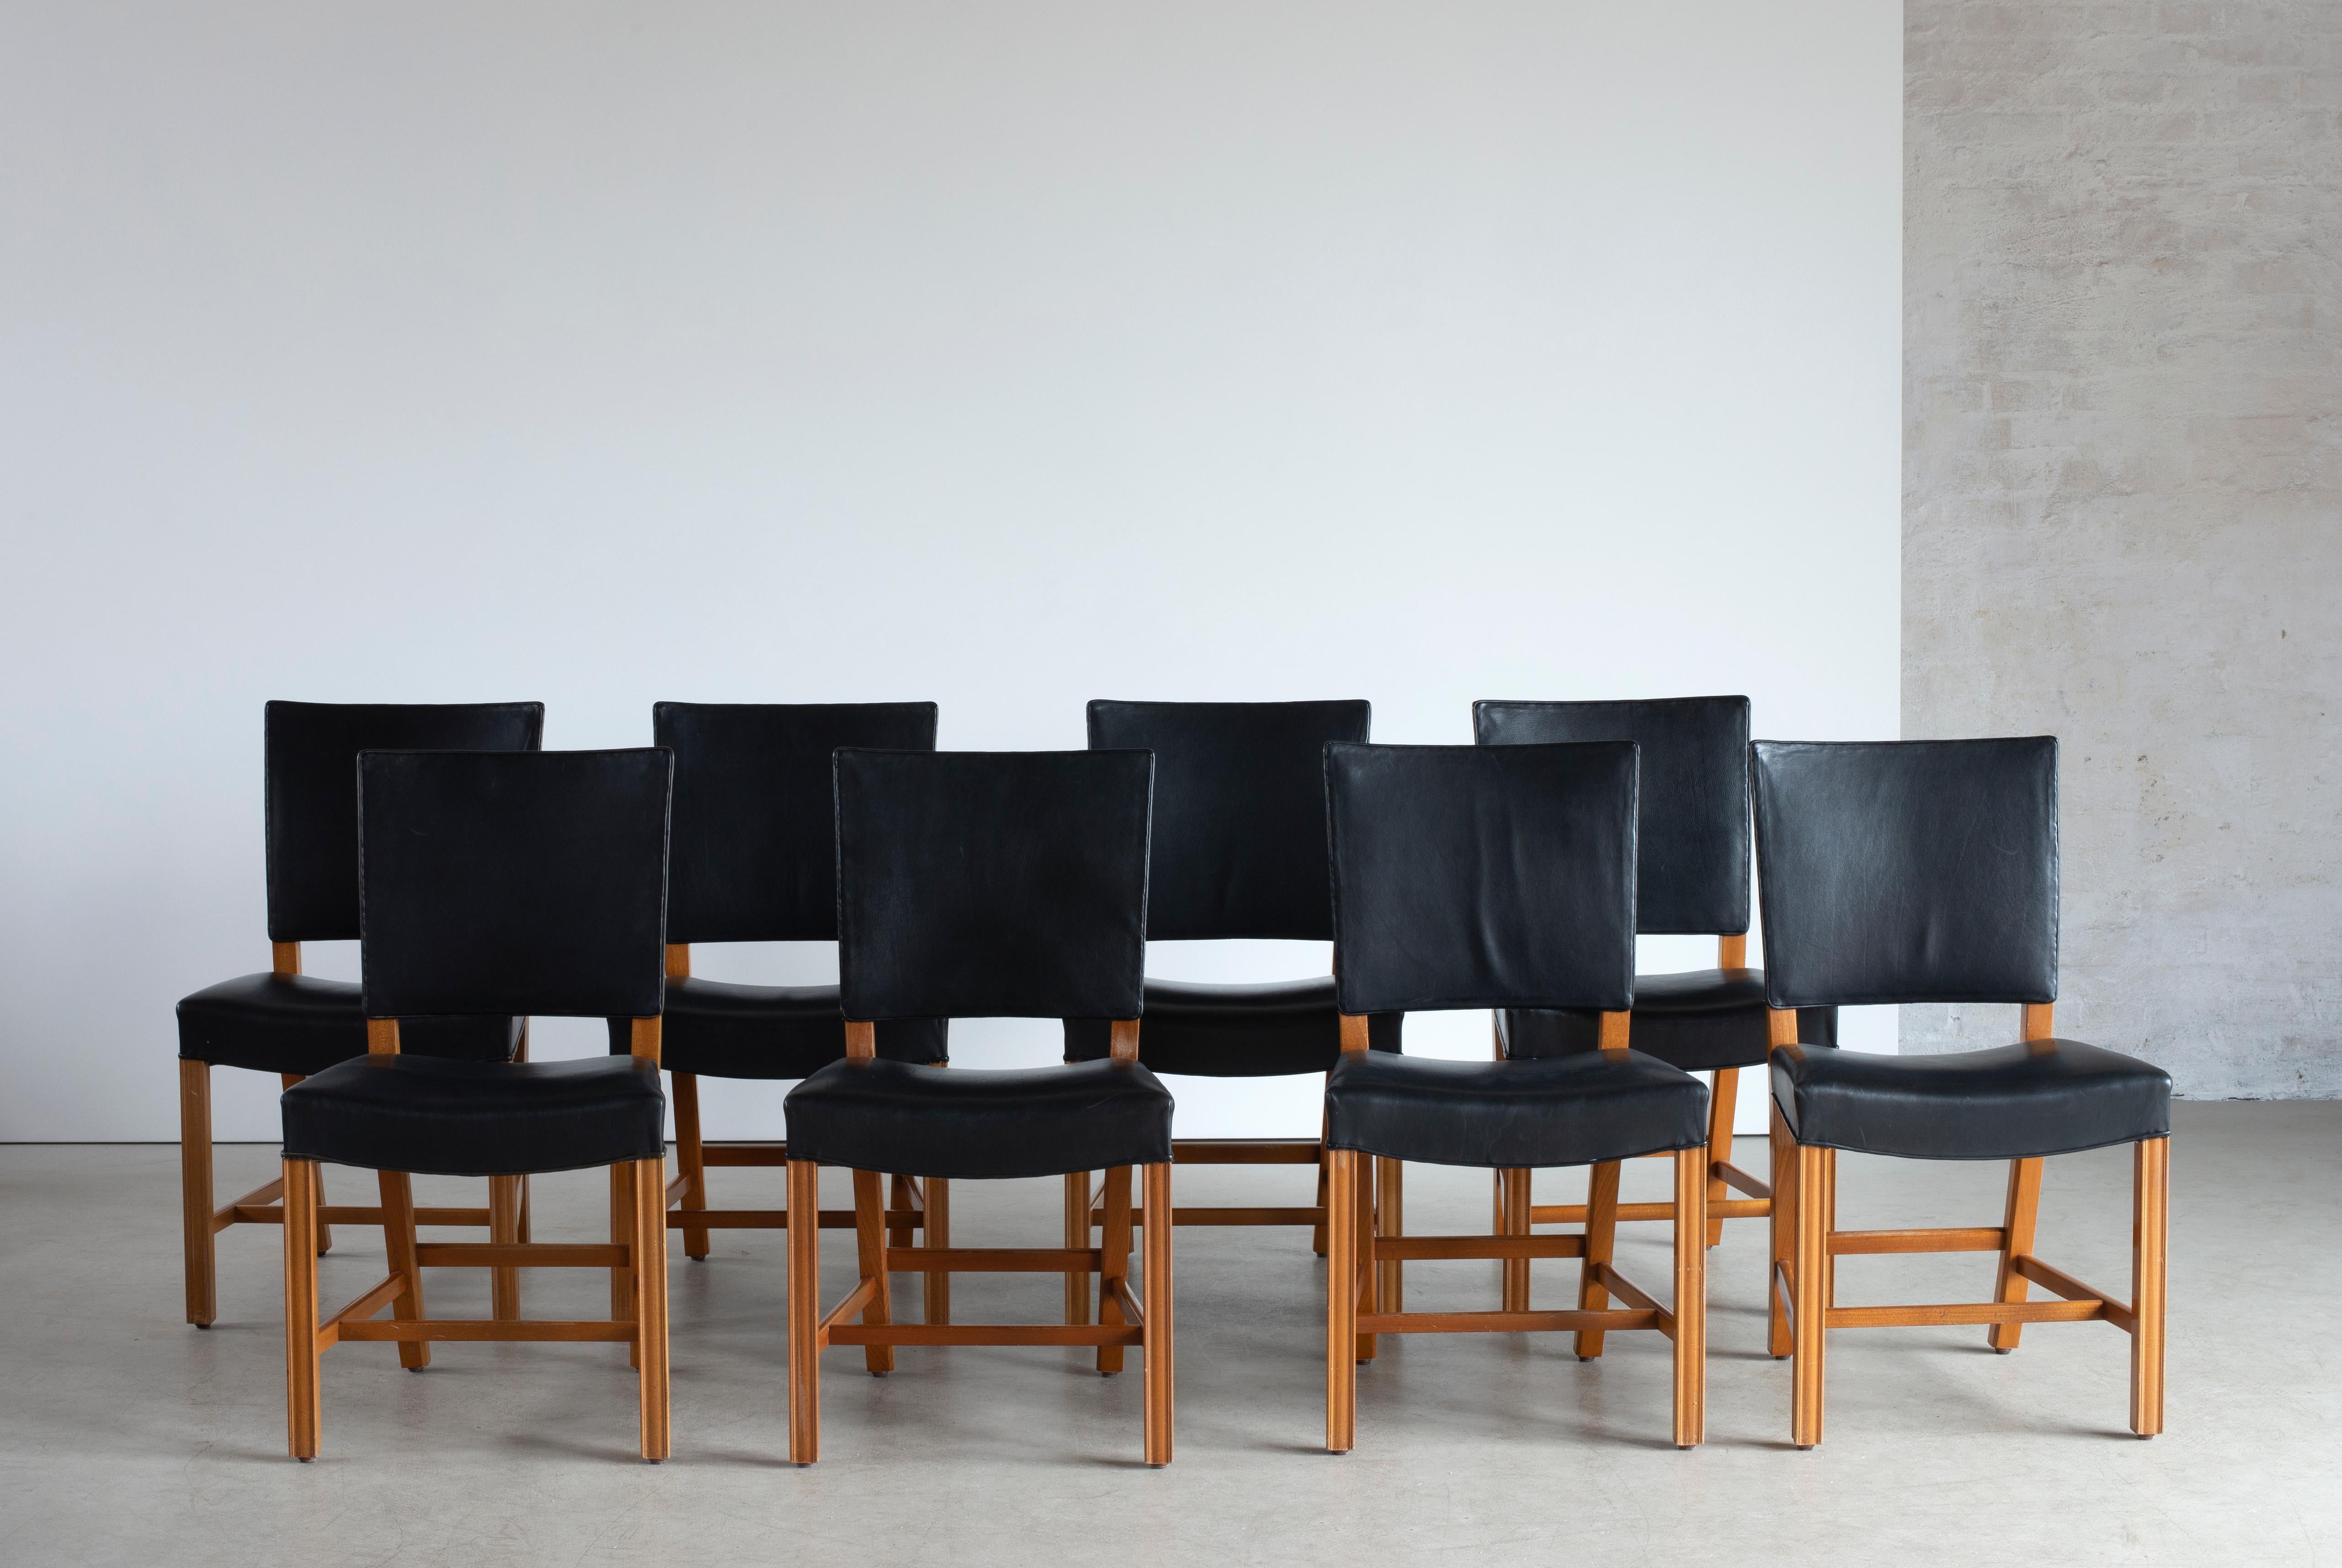 Kaare Klint set of eight red chairs in mahogany, upholstered with black leather. Executed by Rud. Rasmussen.